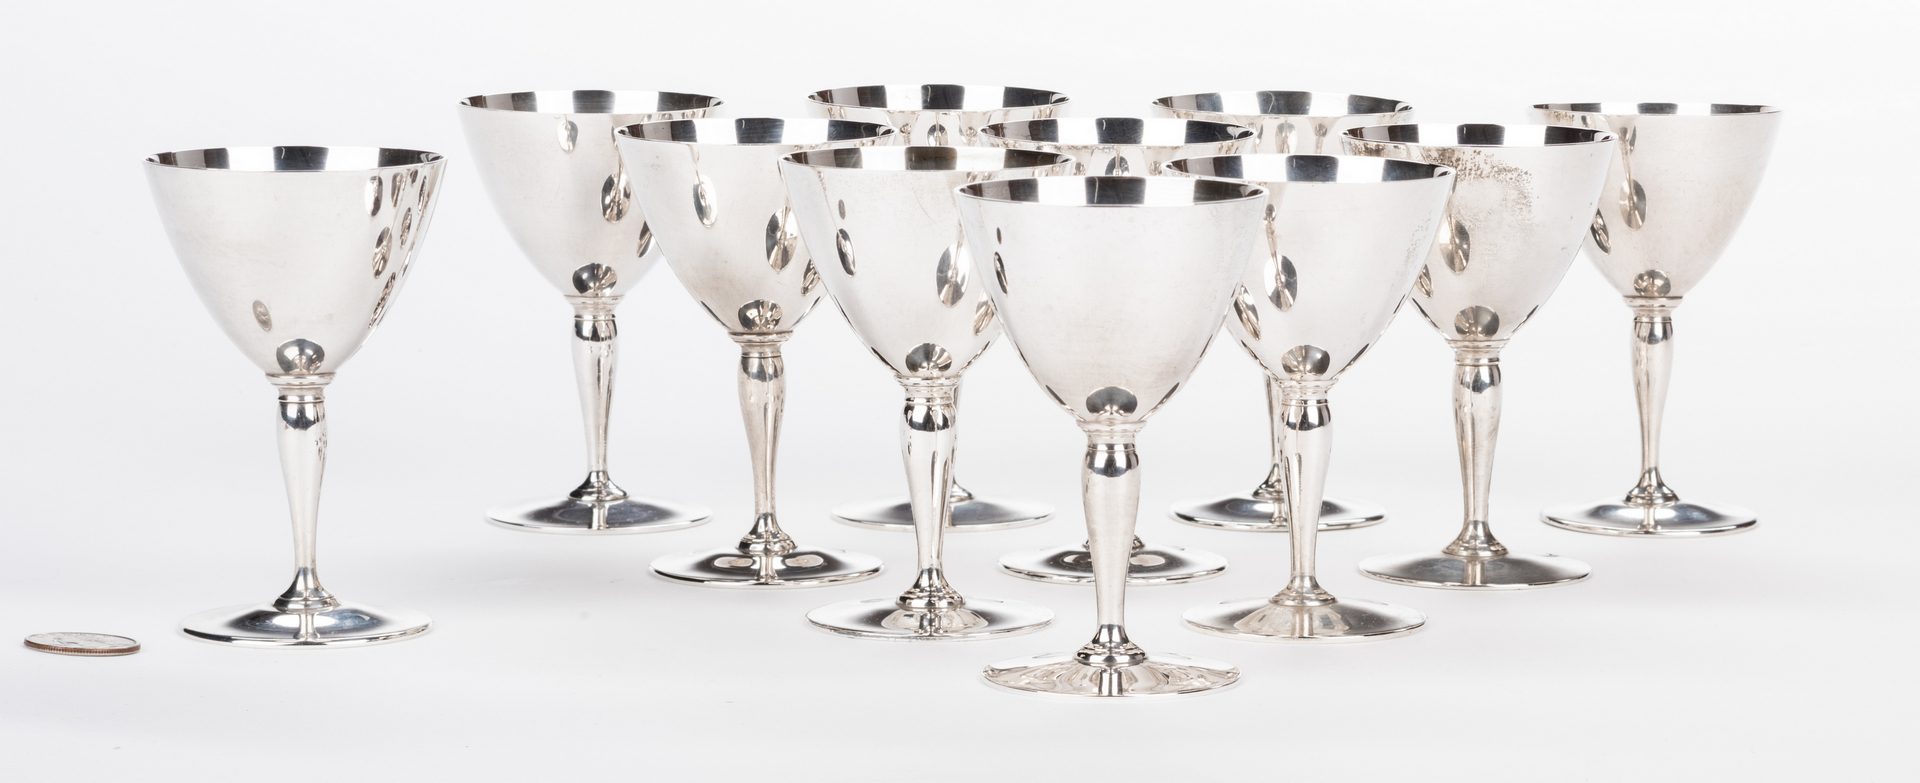 Lot 61: Set of 11 Tiffany & Co Sterling Silver Goblets